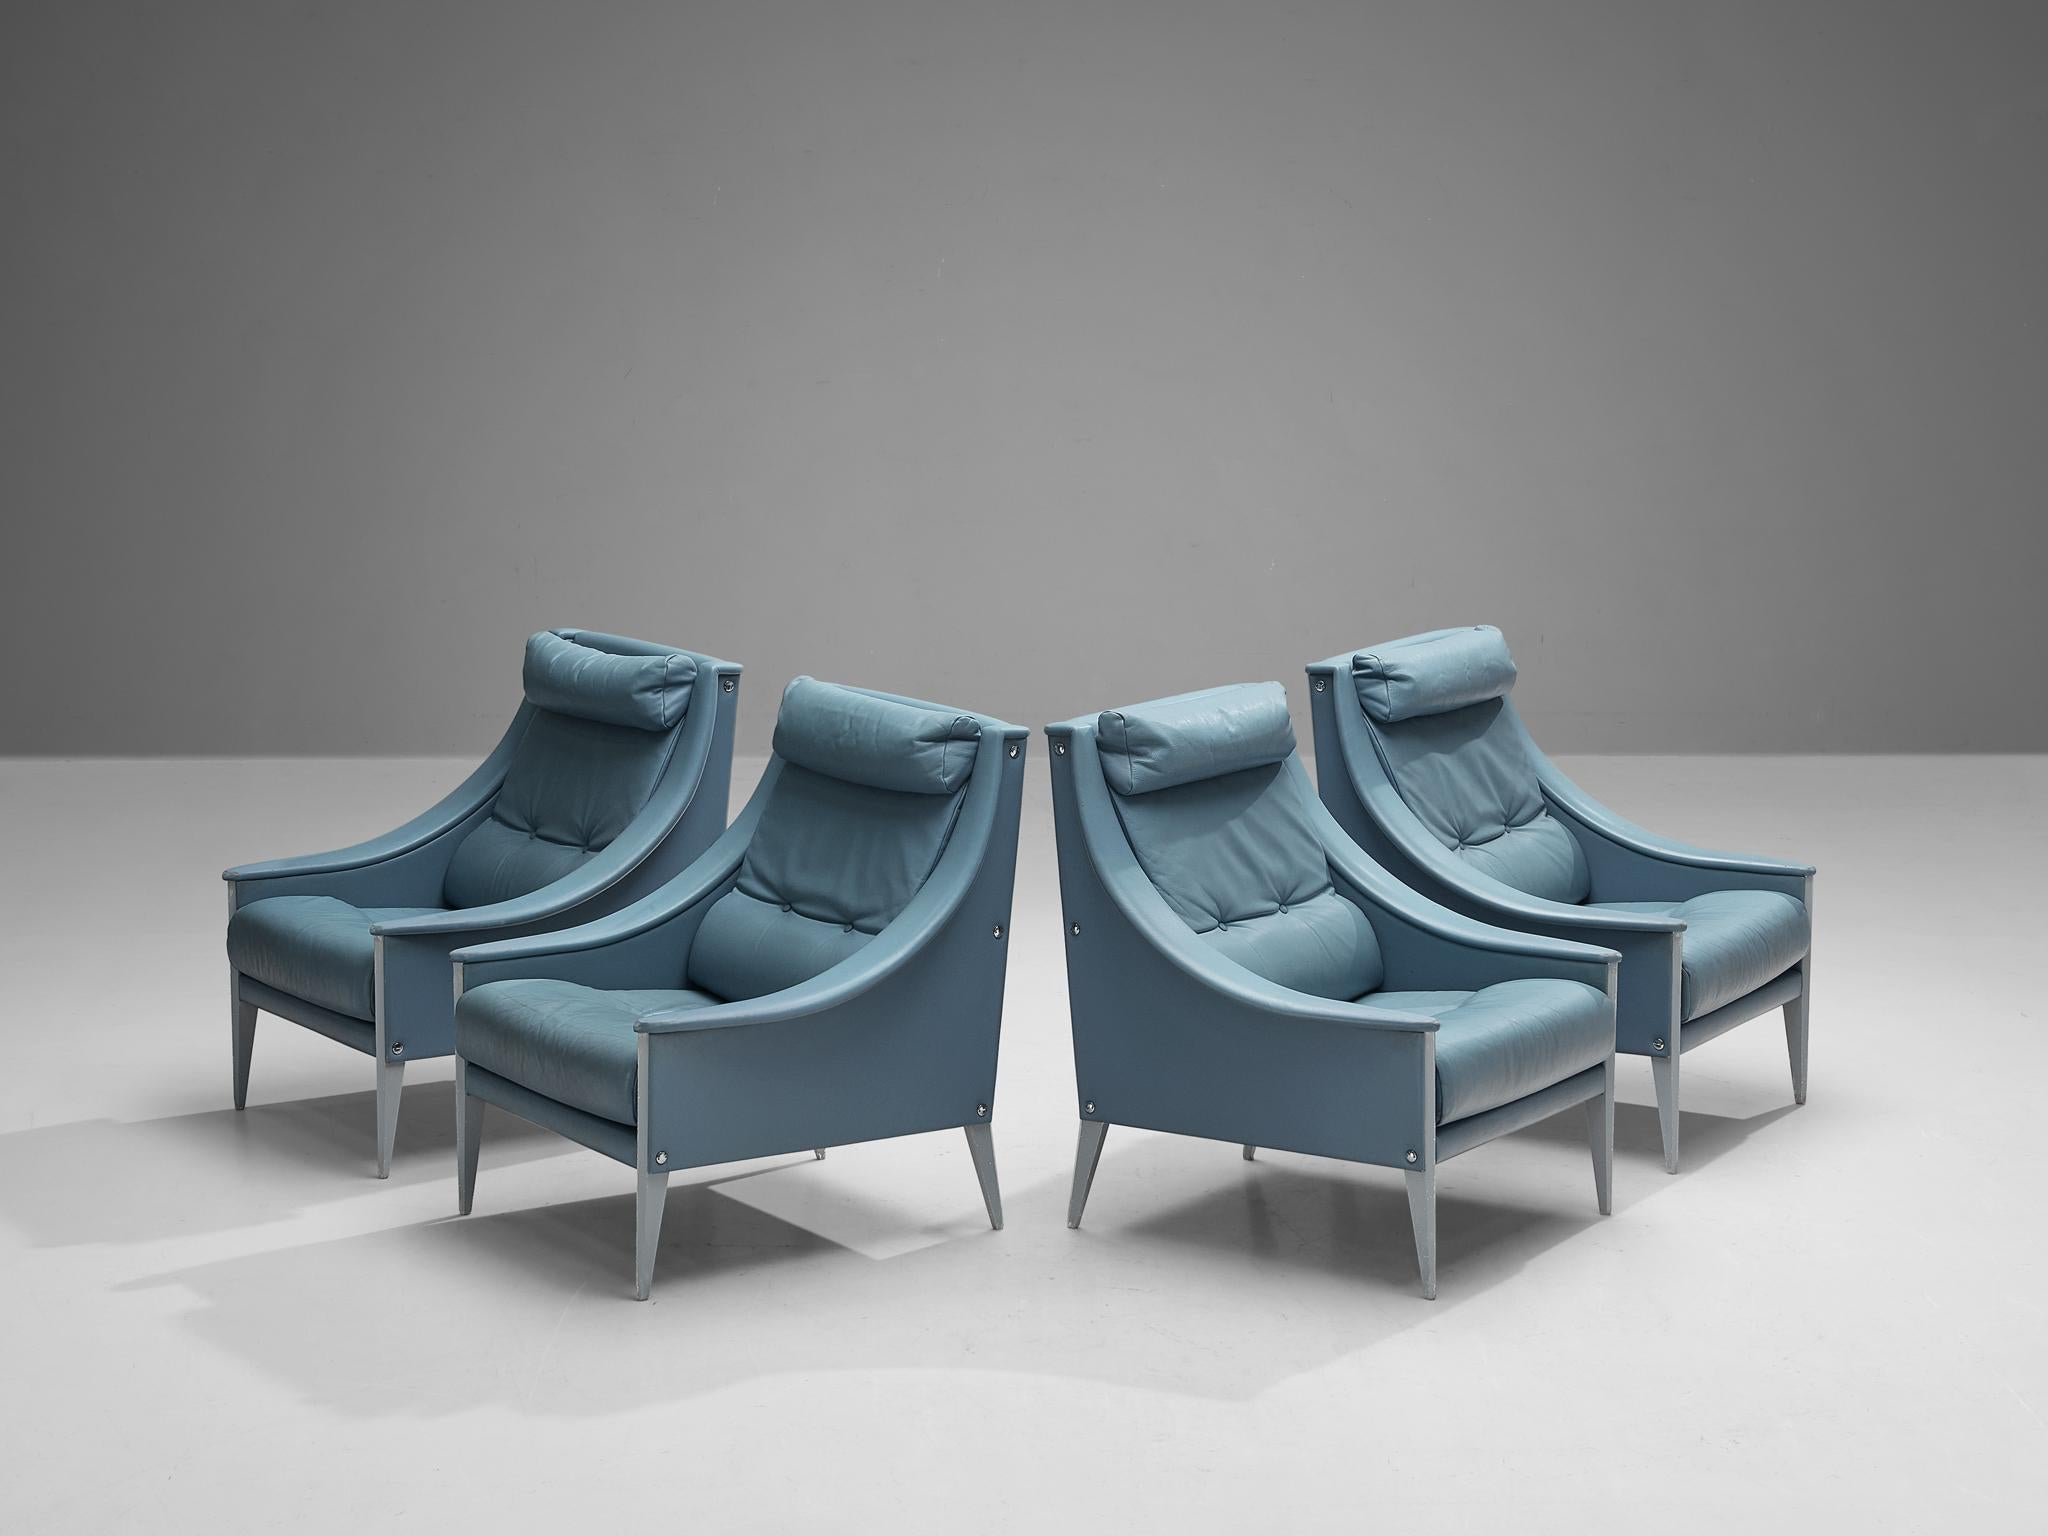 Gio Ponti for Poltrona Frau, lounge chairs, model ´Dezza´ nr. 48, leather, lacquered wood, metal, Italy, 1965. 

Set of four stylish lounge chairs designed by Gio Ponti for Poltrona Frau. These chairs embody some of Ponti’s most important design